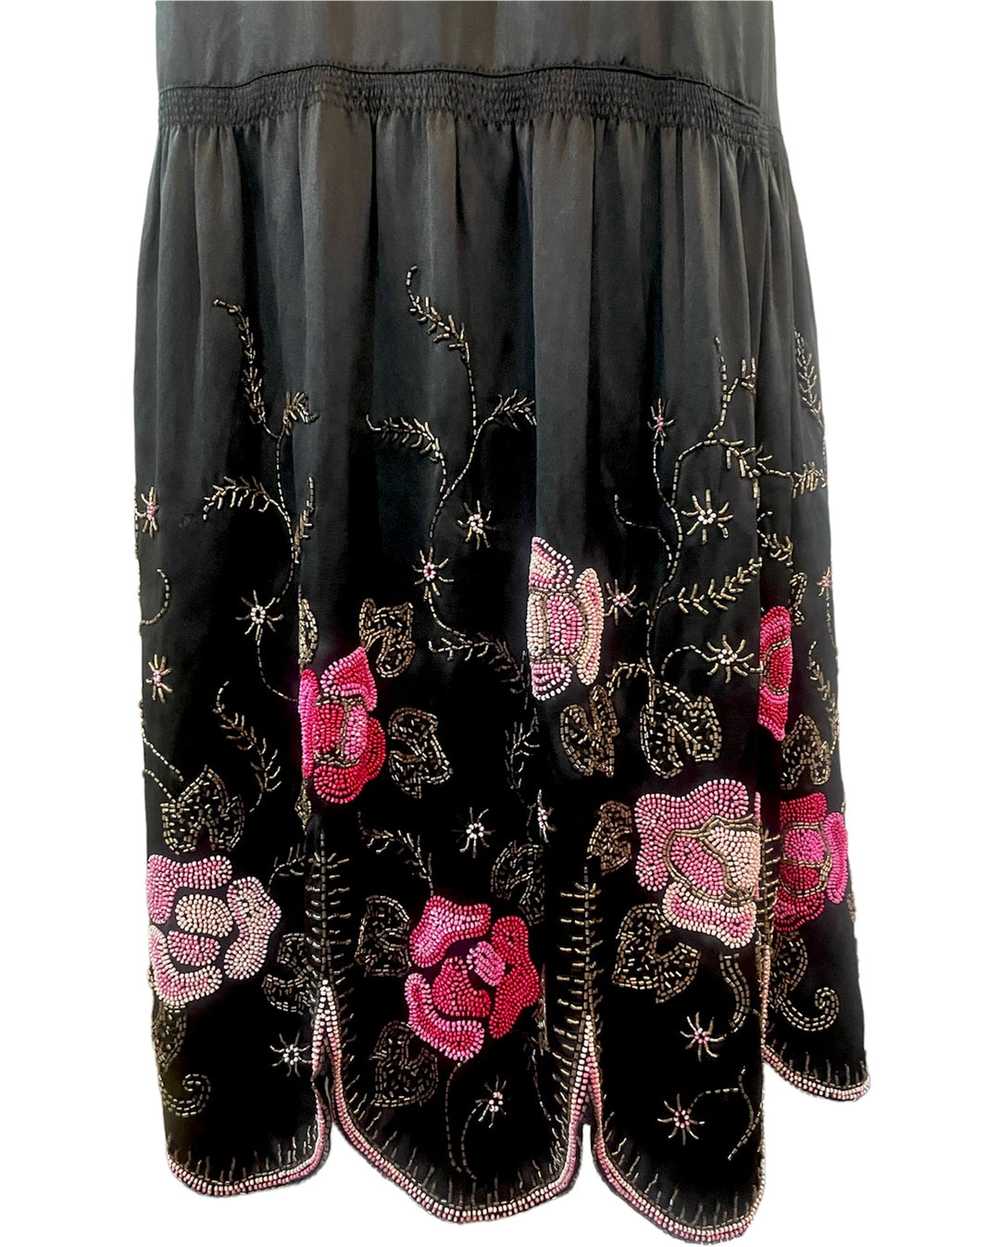 20s Satin Floral Beaded Dress with Scallop Hem - image 5